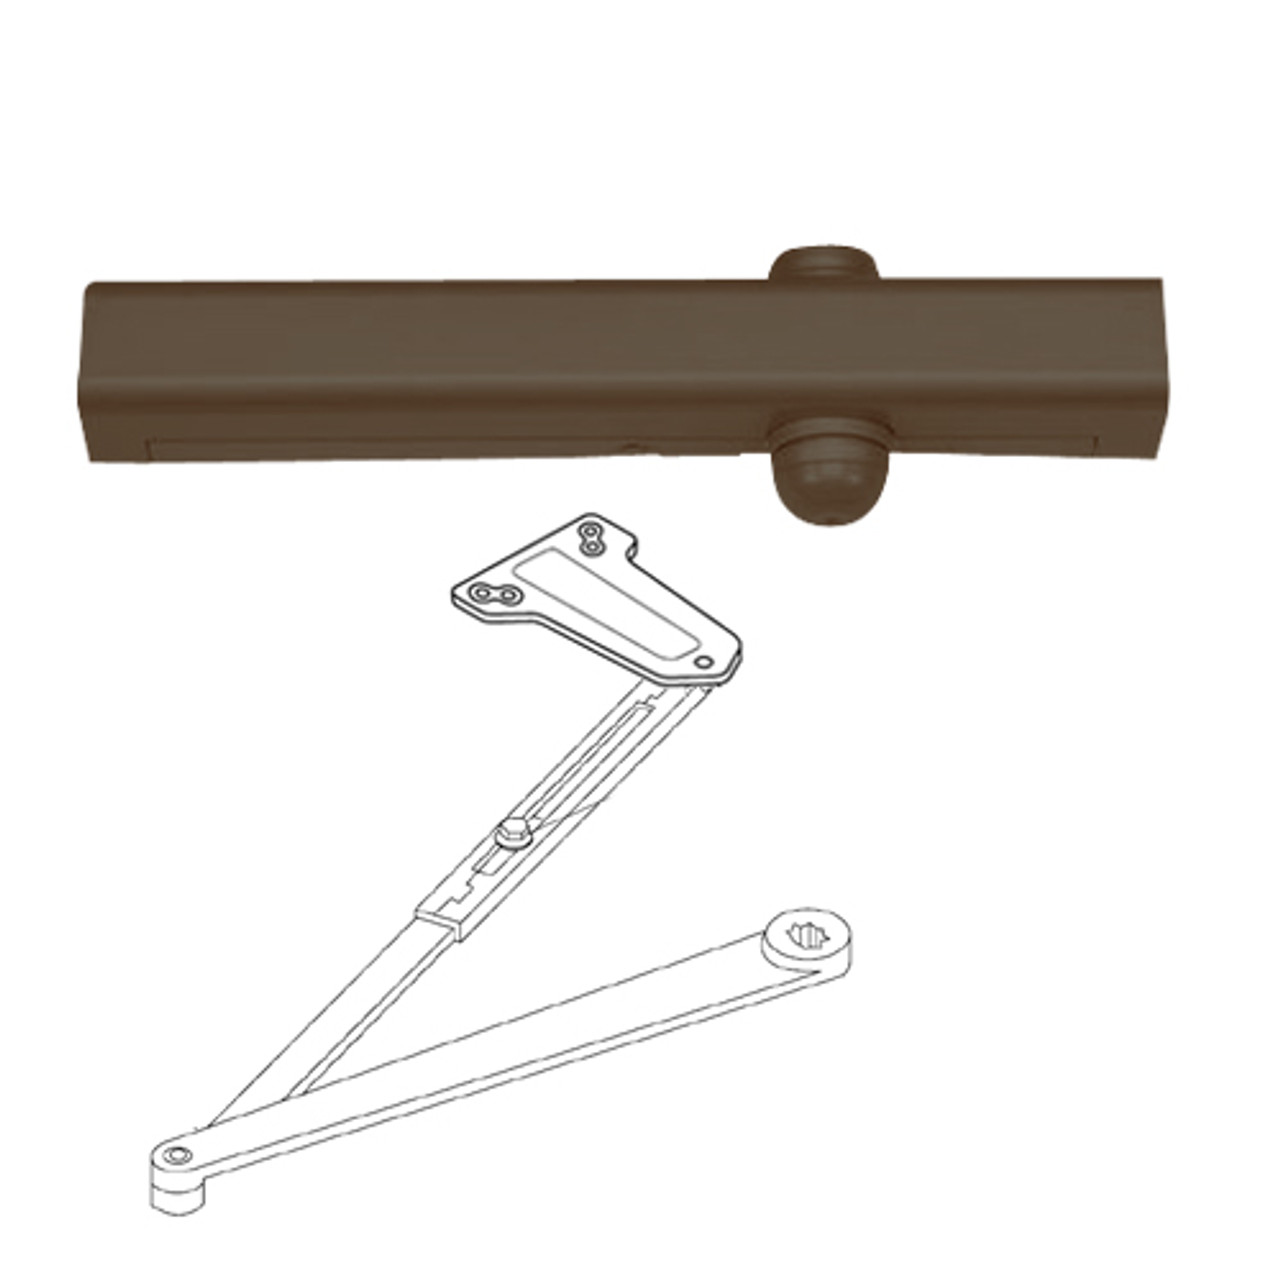 PA3381-690 Yale 3000 Series Architectural Door Closer with Parallel Low Profile Arm in Dark Bronze